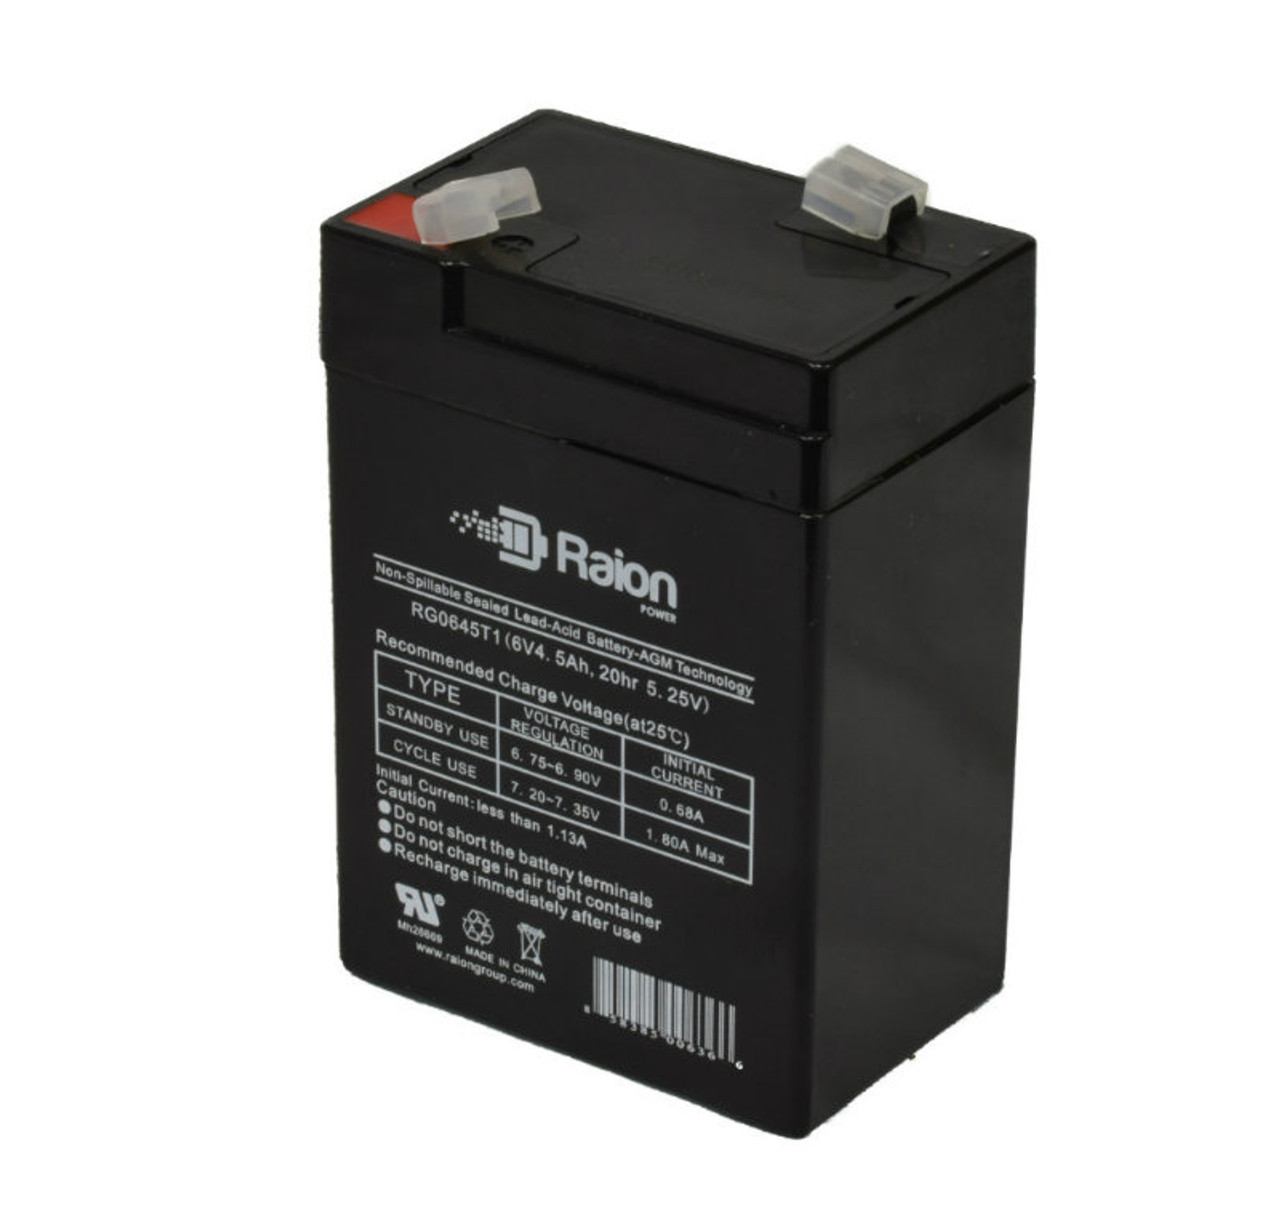 Raion Power RG0645T1 6V 4.5Ah Replacement Battery Cartridge for Light Alarms SQL